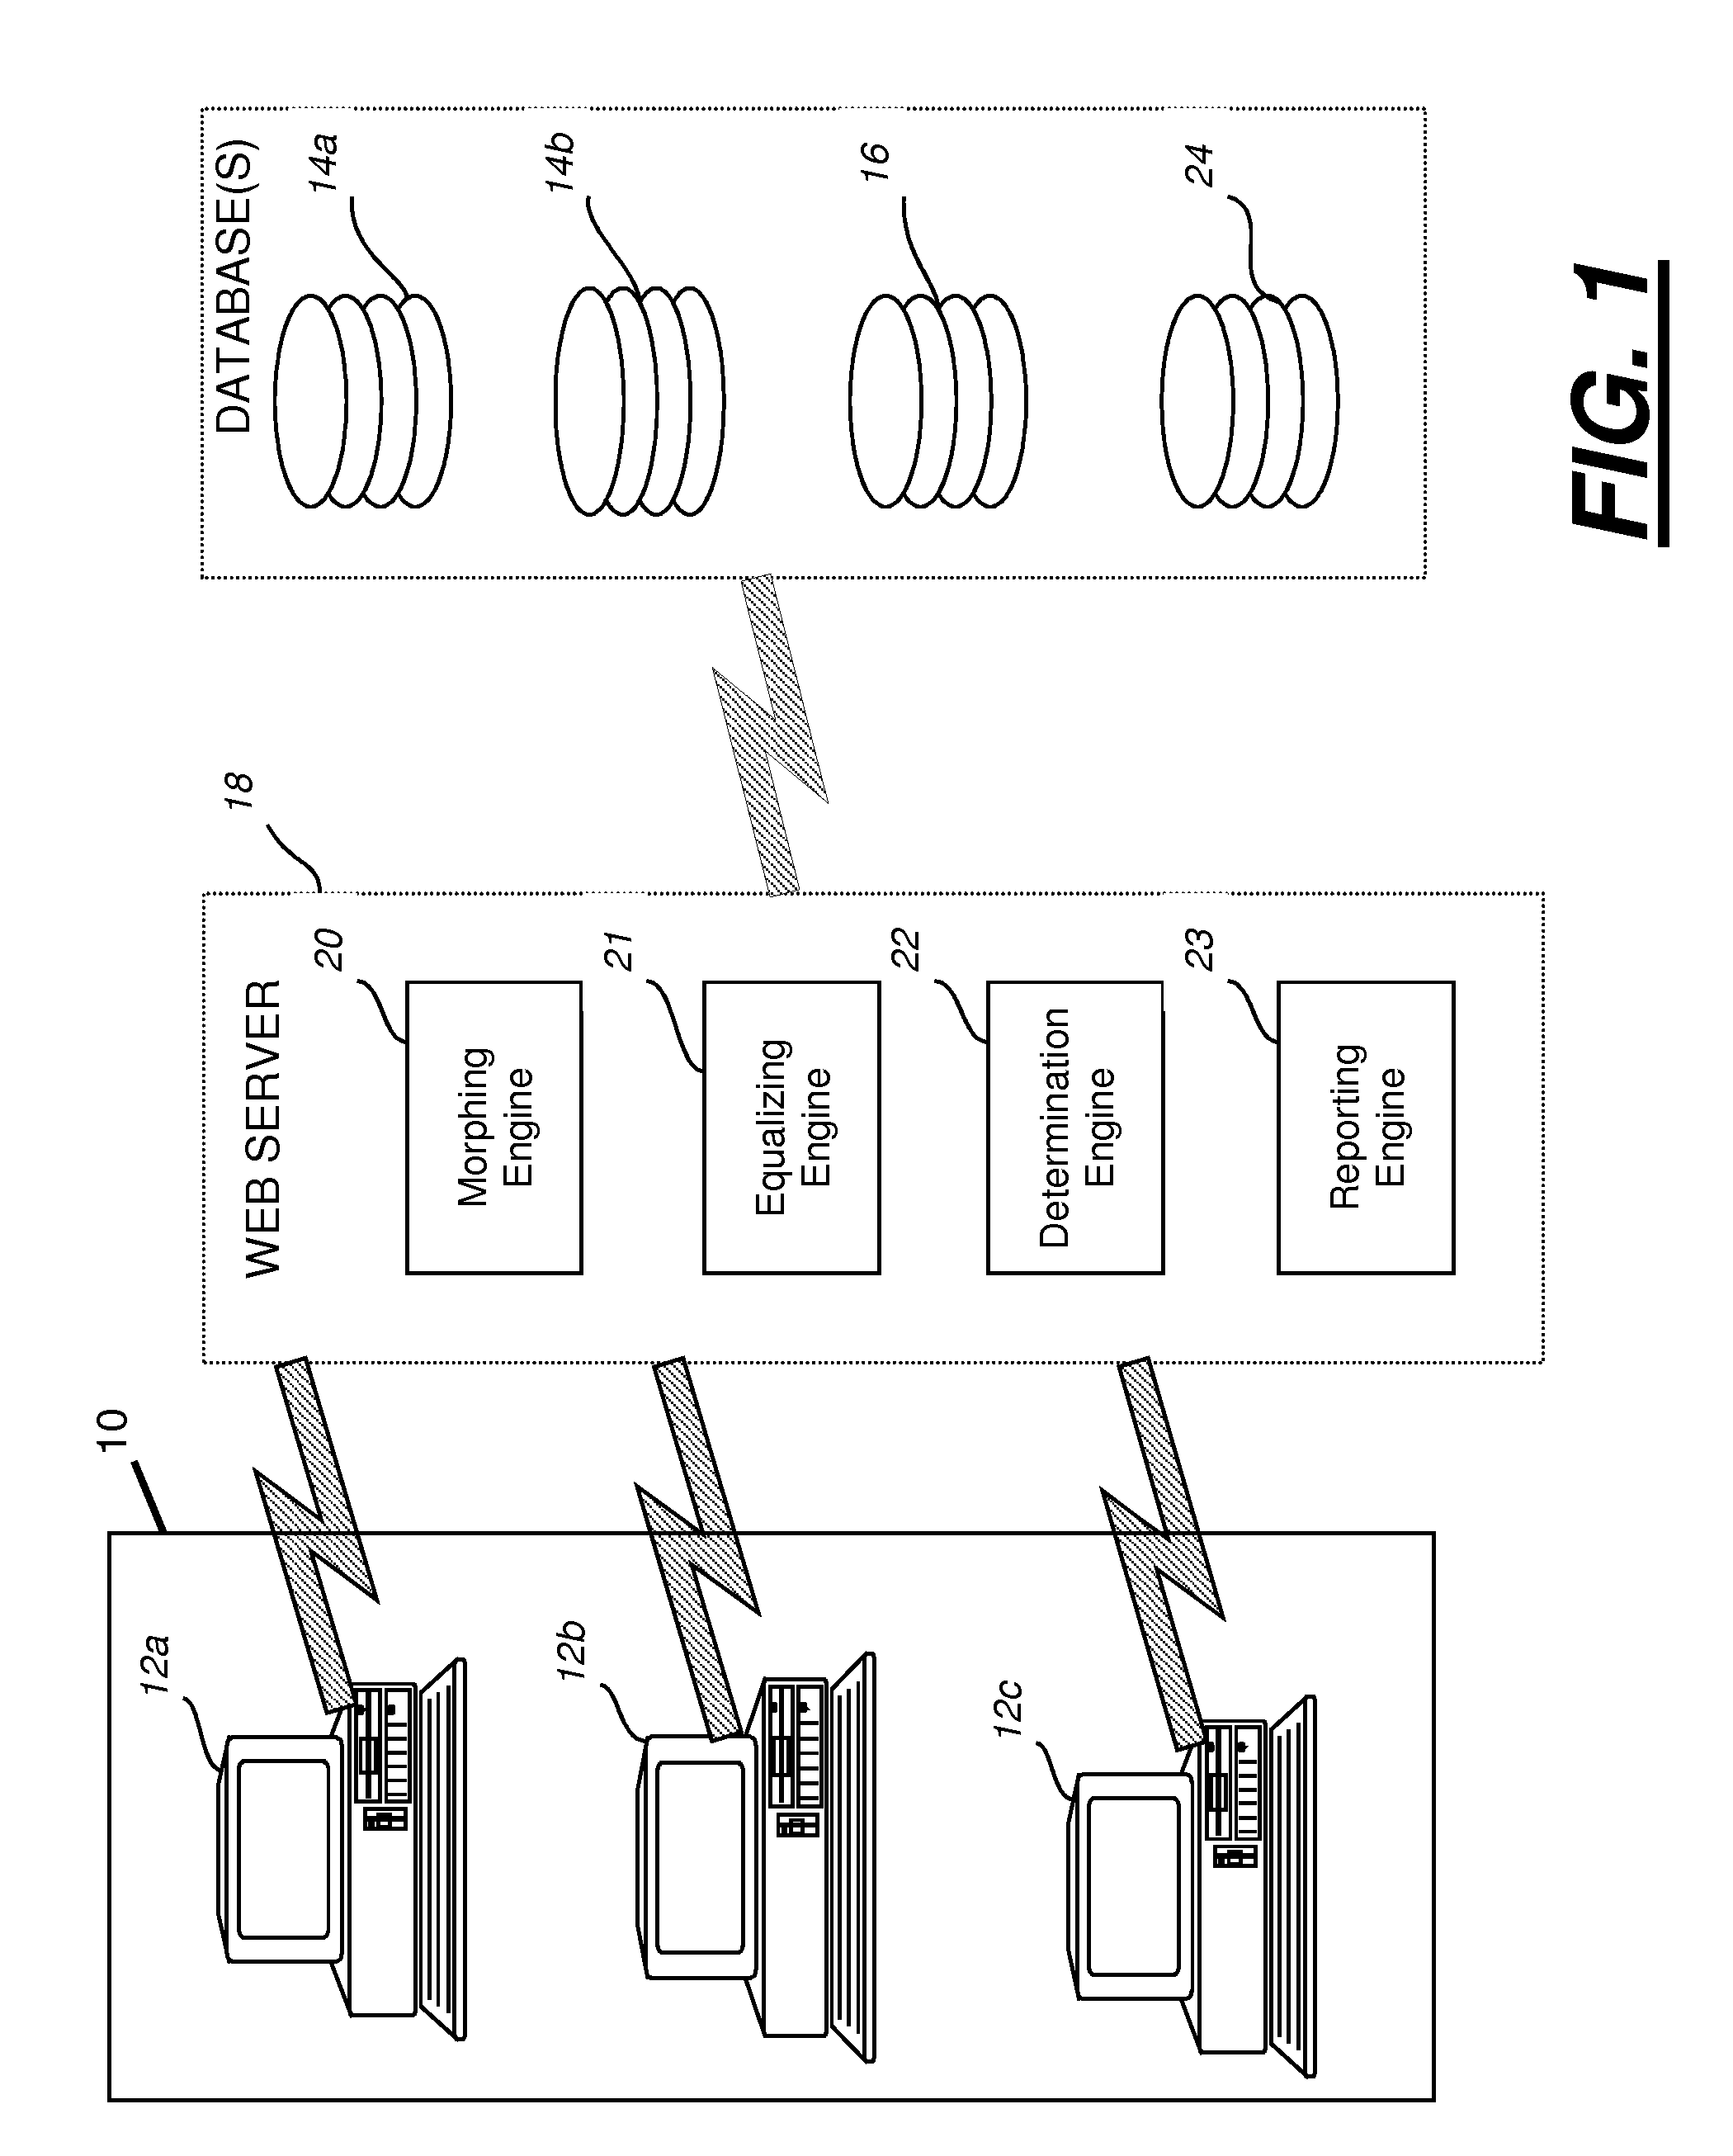 Computerized method and system for selecting technology used in vehicle production